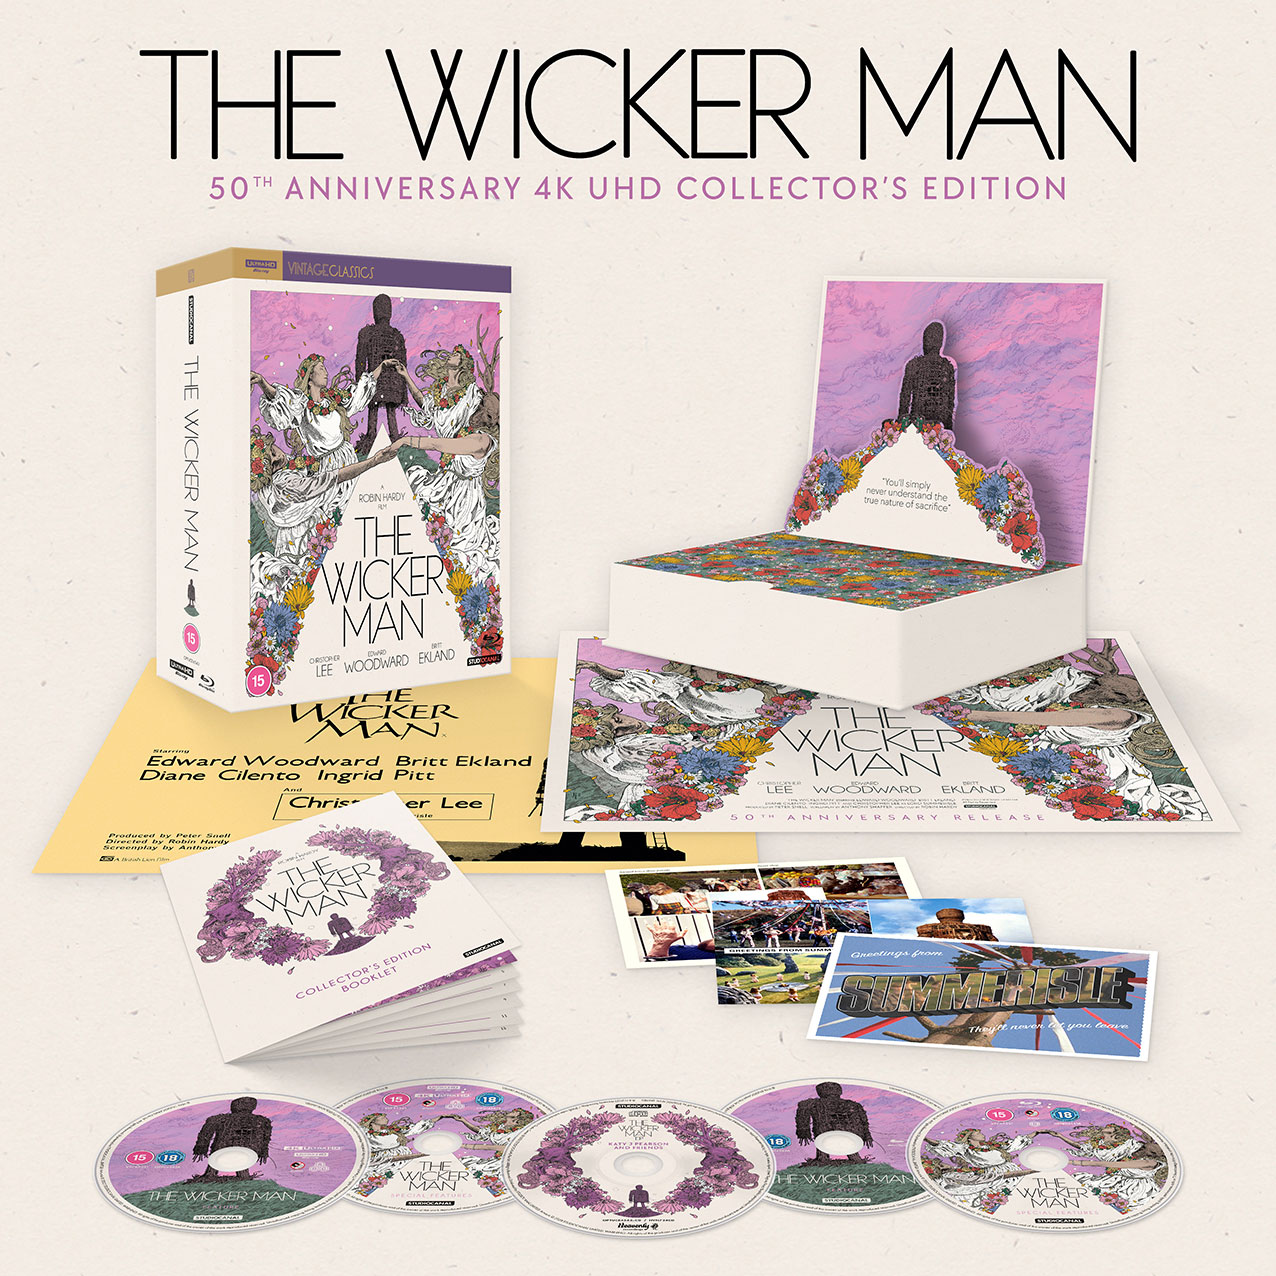 The Wicker man 50th Anniversary UHD Collector's Edition pack shot